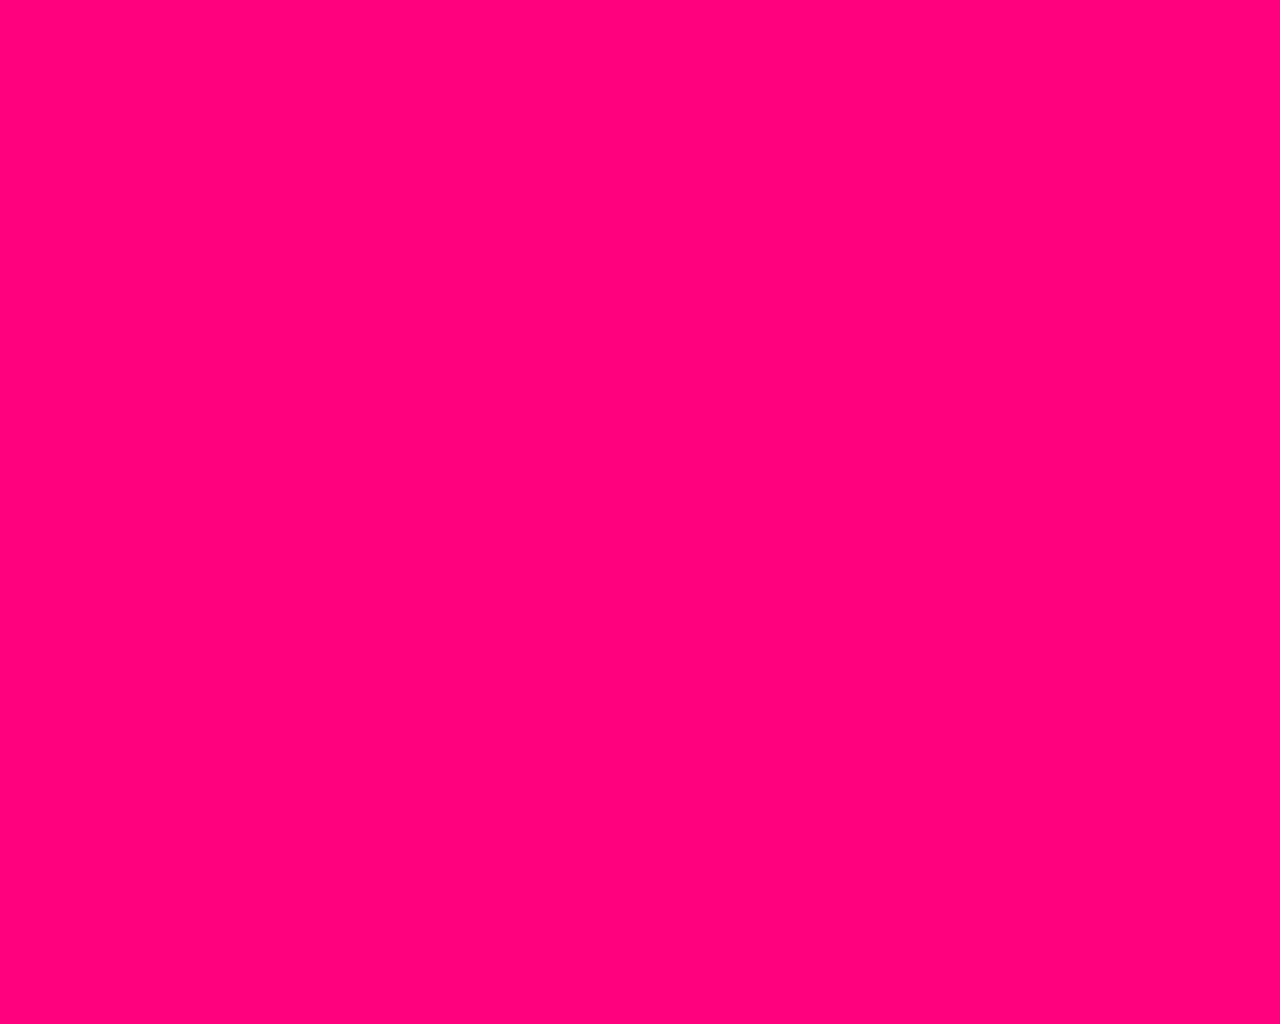 1280x1024 Bright Pink Solid Color Background